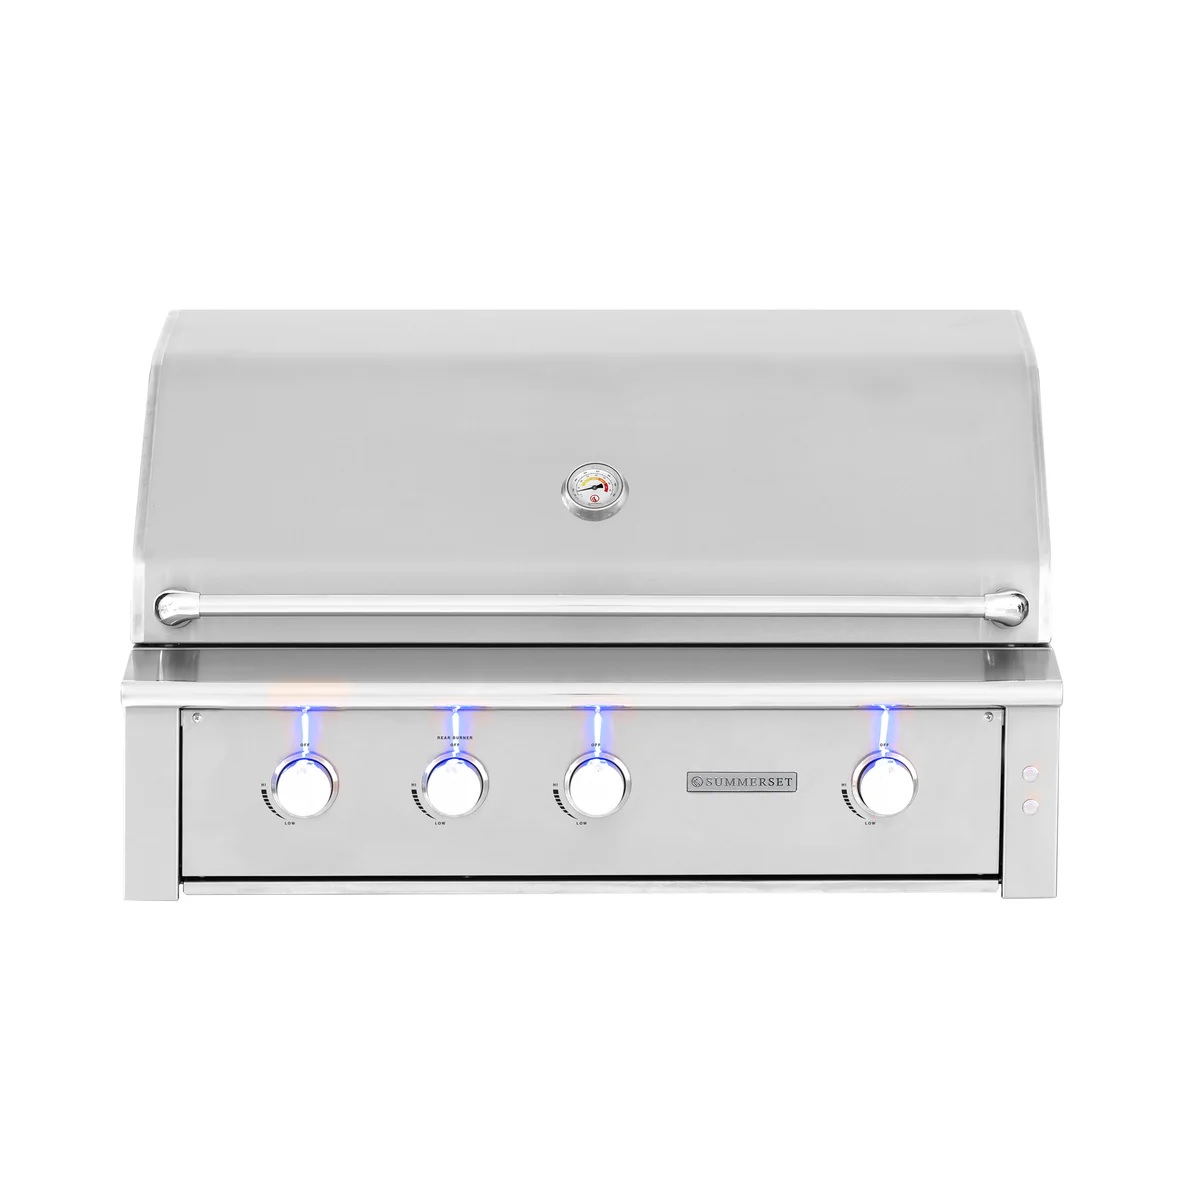 alturi grill u-tube series 42 inch natural gas product image